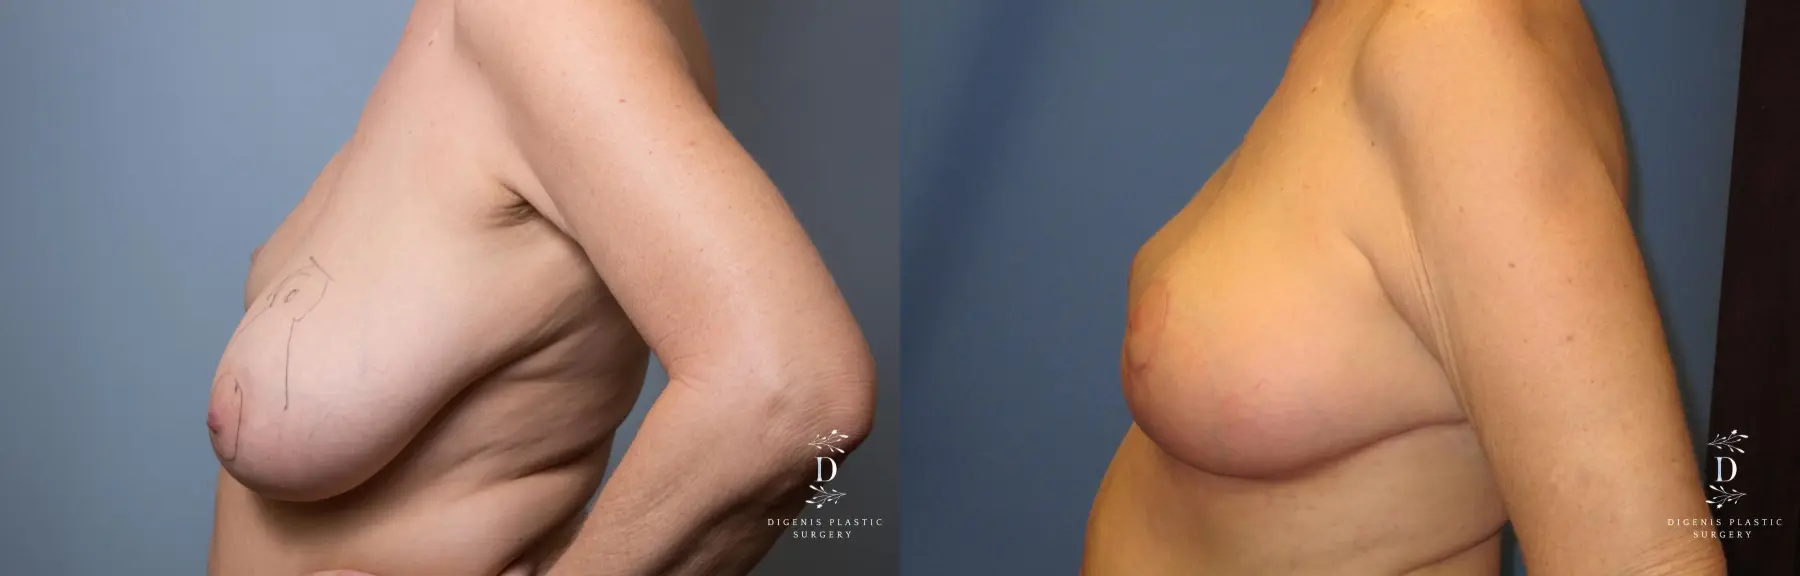 Breast Lift: Patient 6 - Before and After 5